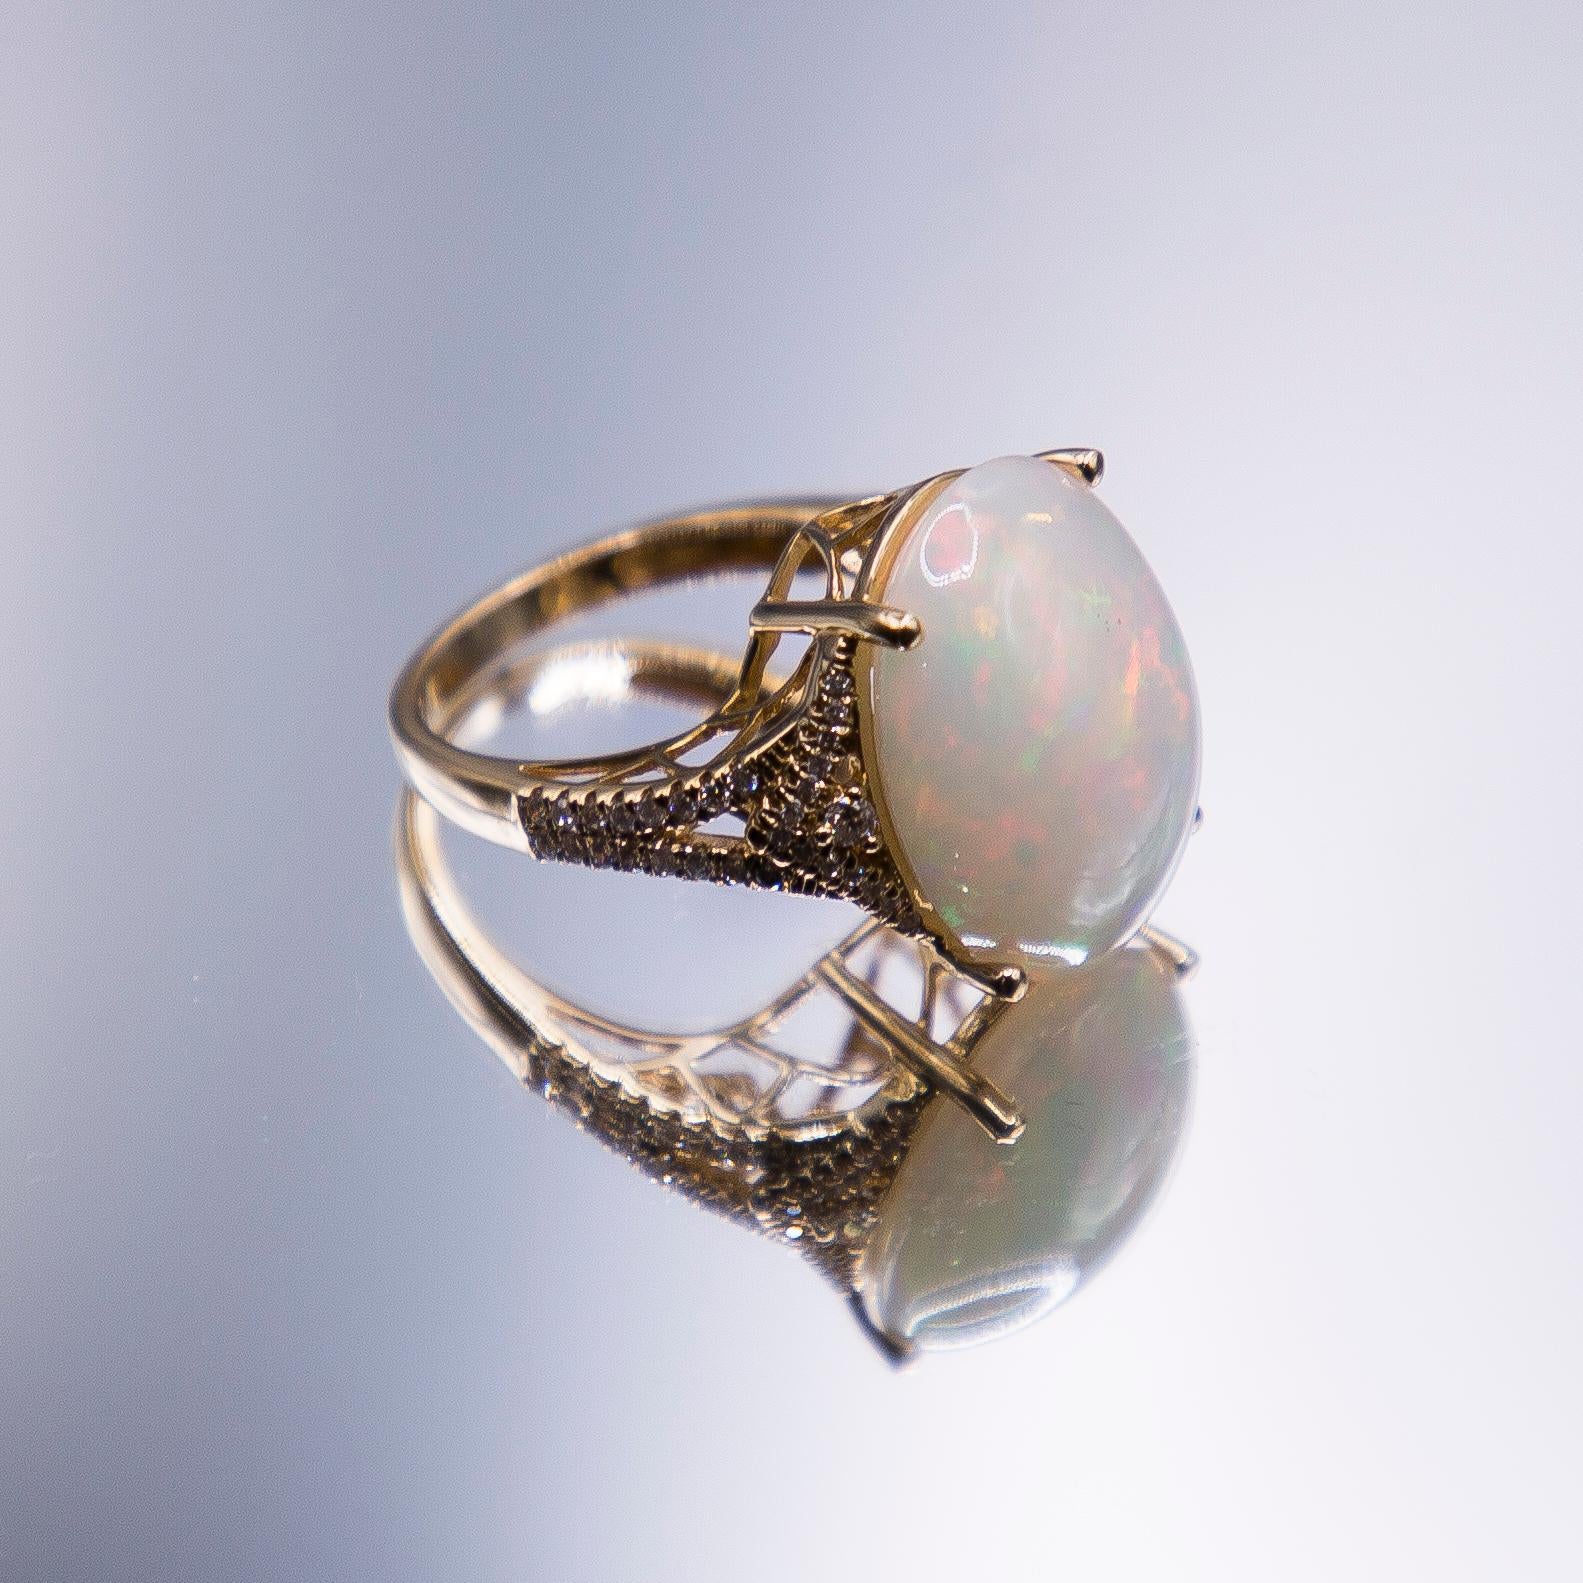 Unrivaled, this heart stopping  11.83 carat Crystal Opal from Lightning Ridge Australia, is amongst the most intriguing and mysterious of the designer's 5-decades career.  The lovely cab radiates predominantly harlequin flashes of hot reds and